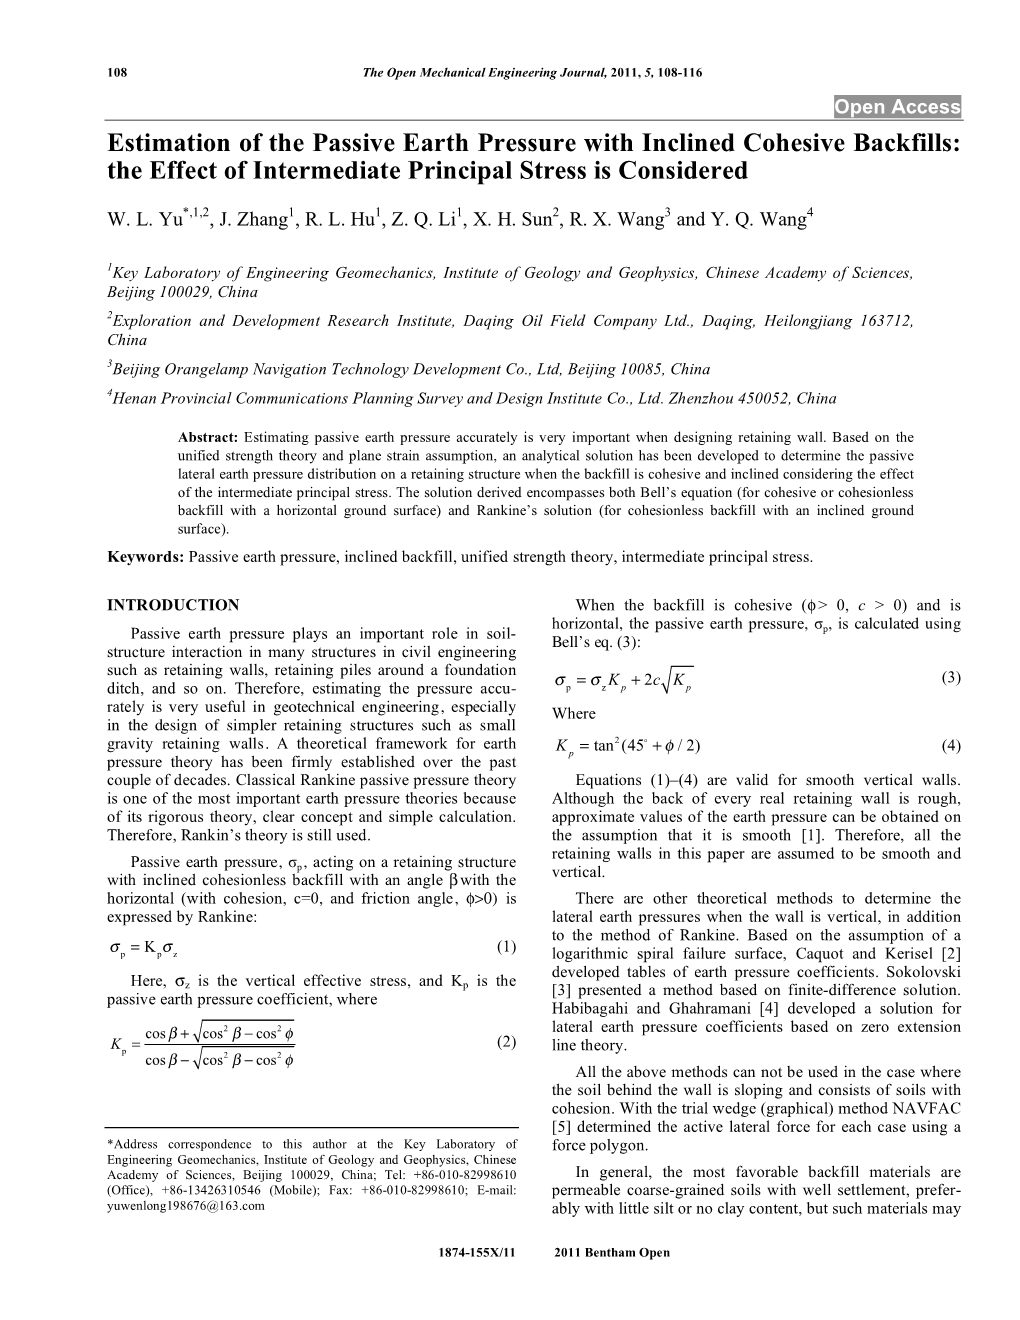 Estimation of the Passive Earth Pressure with Inclined Cohesive Backfills: the Effect of Intermediate Principal Stress Is Considered